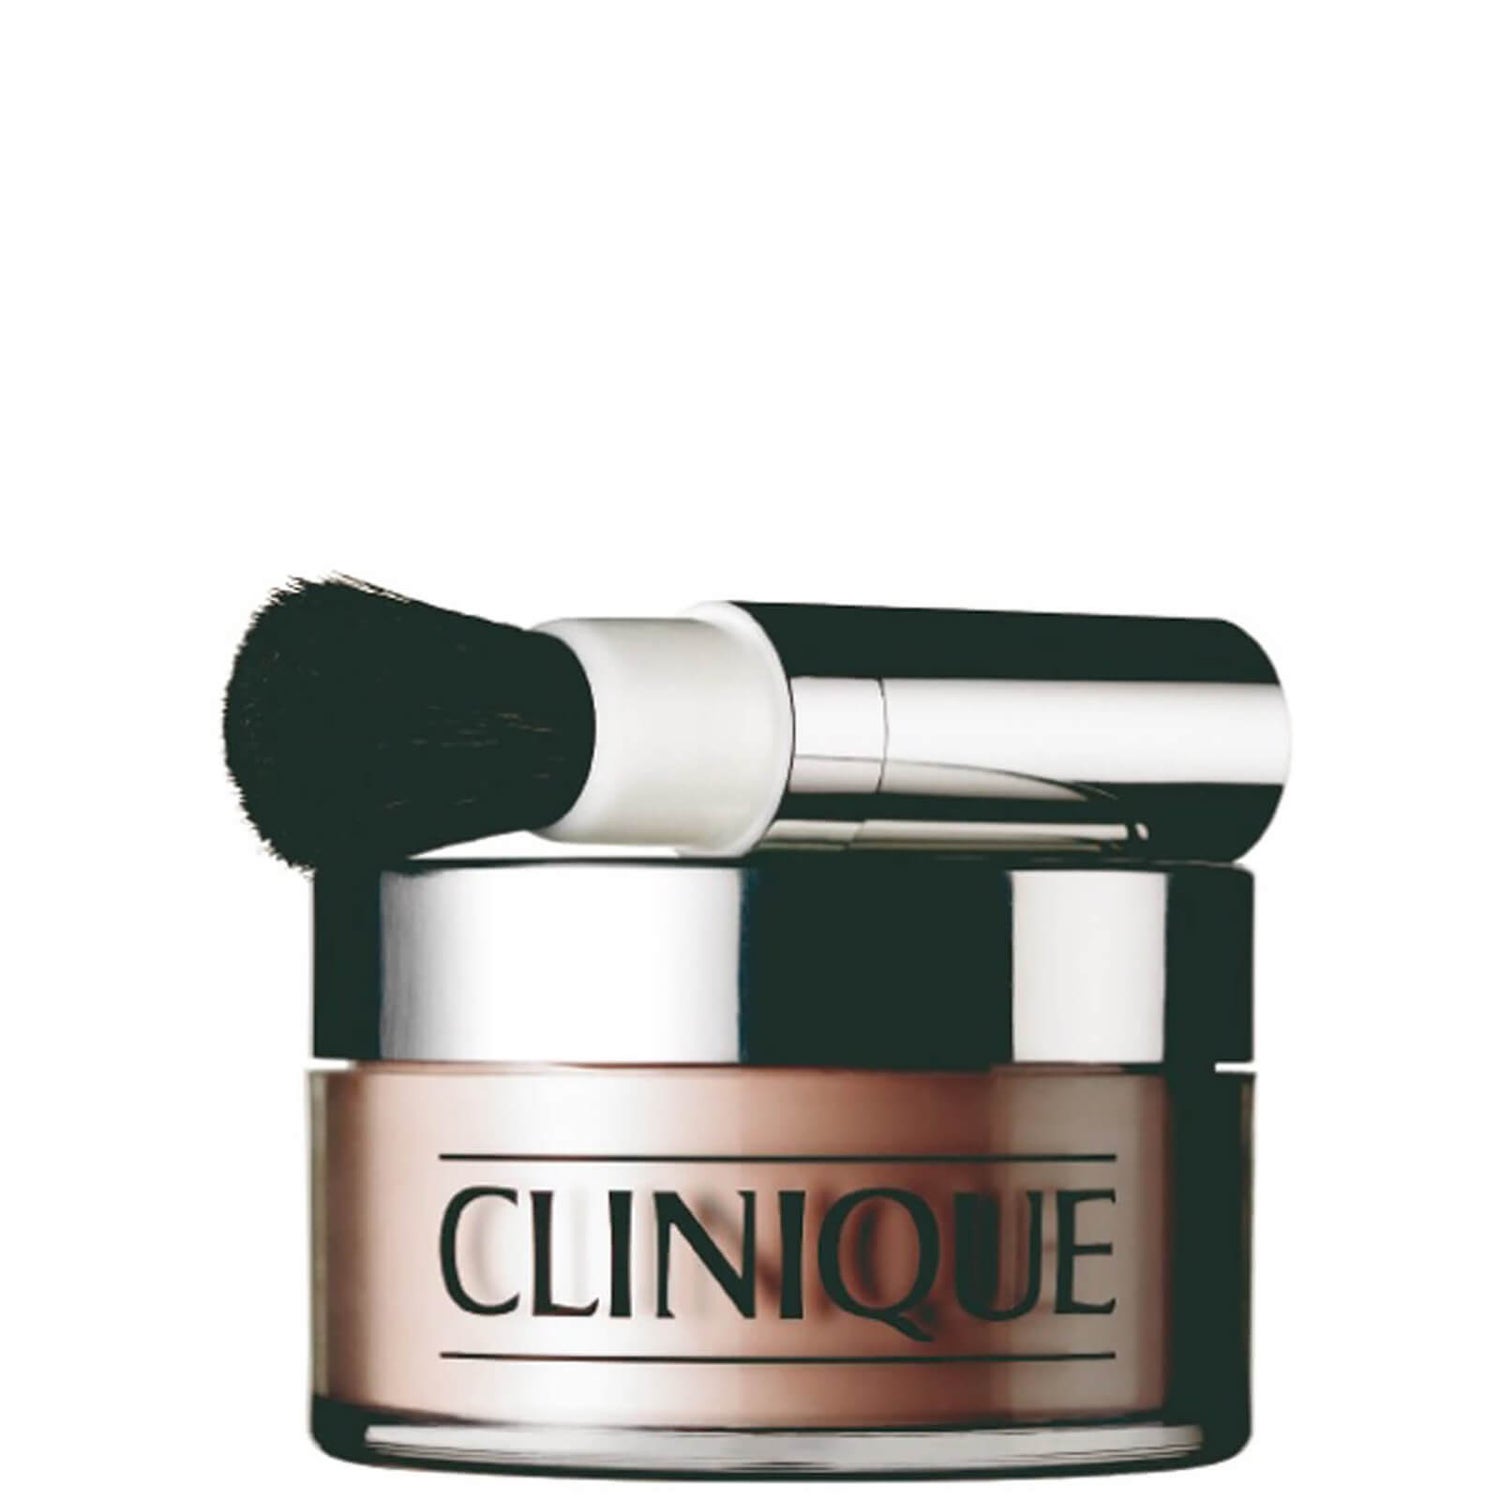 Clinique Blended Face Powder and Brush 35 g